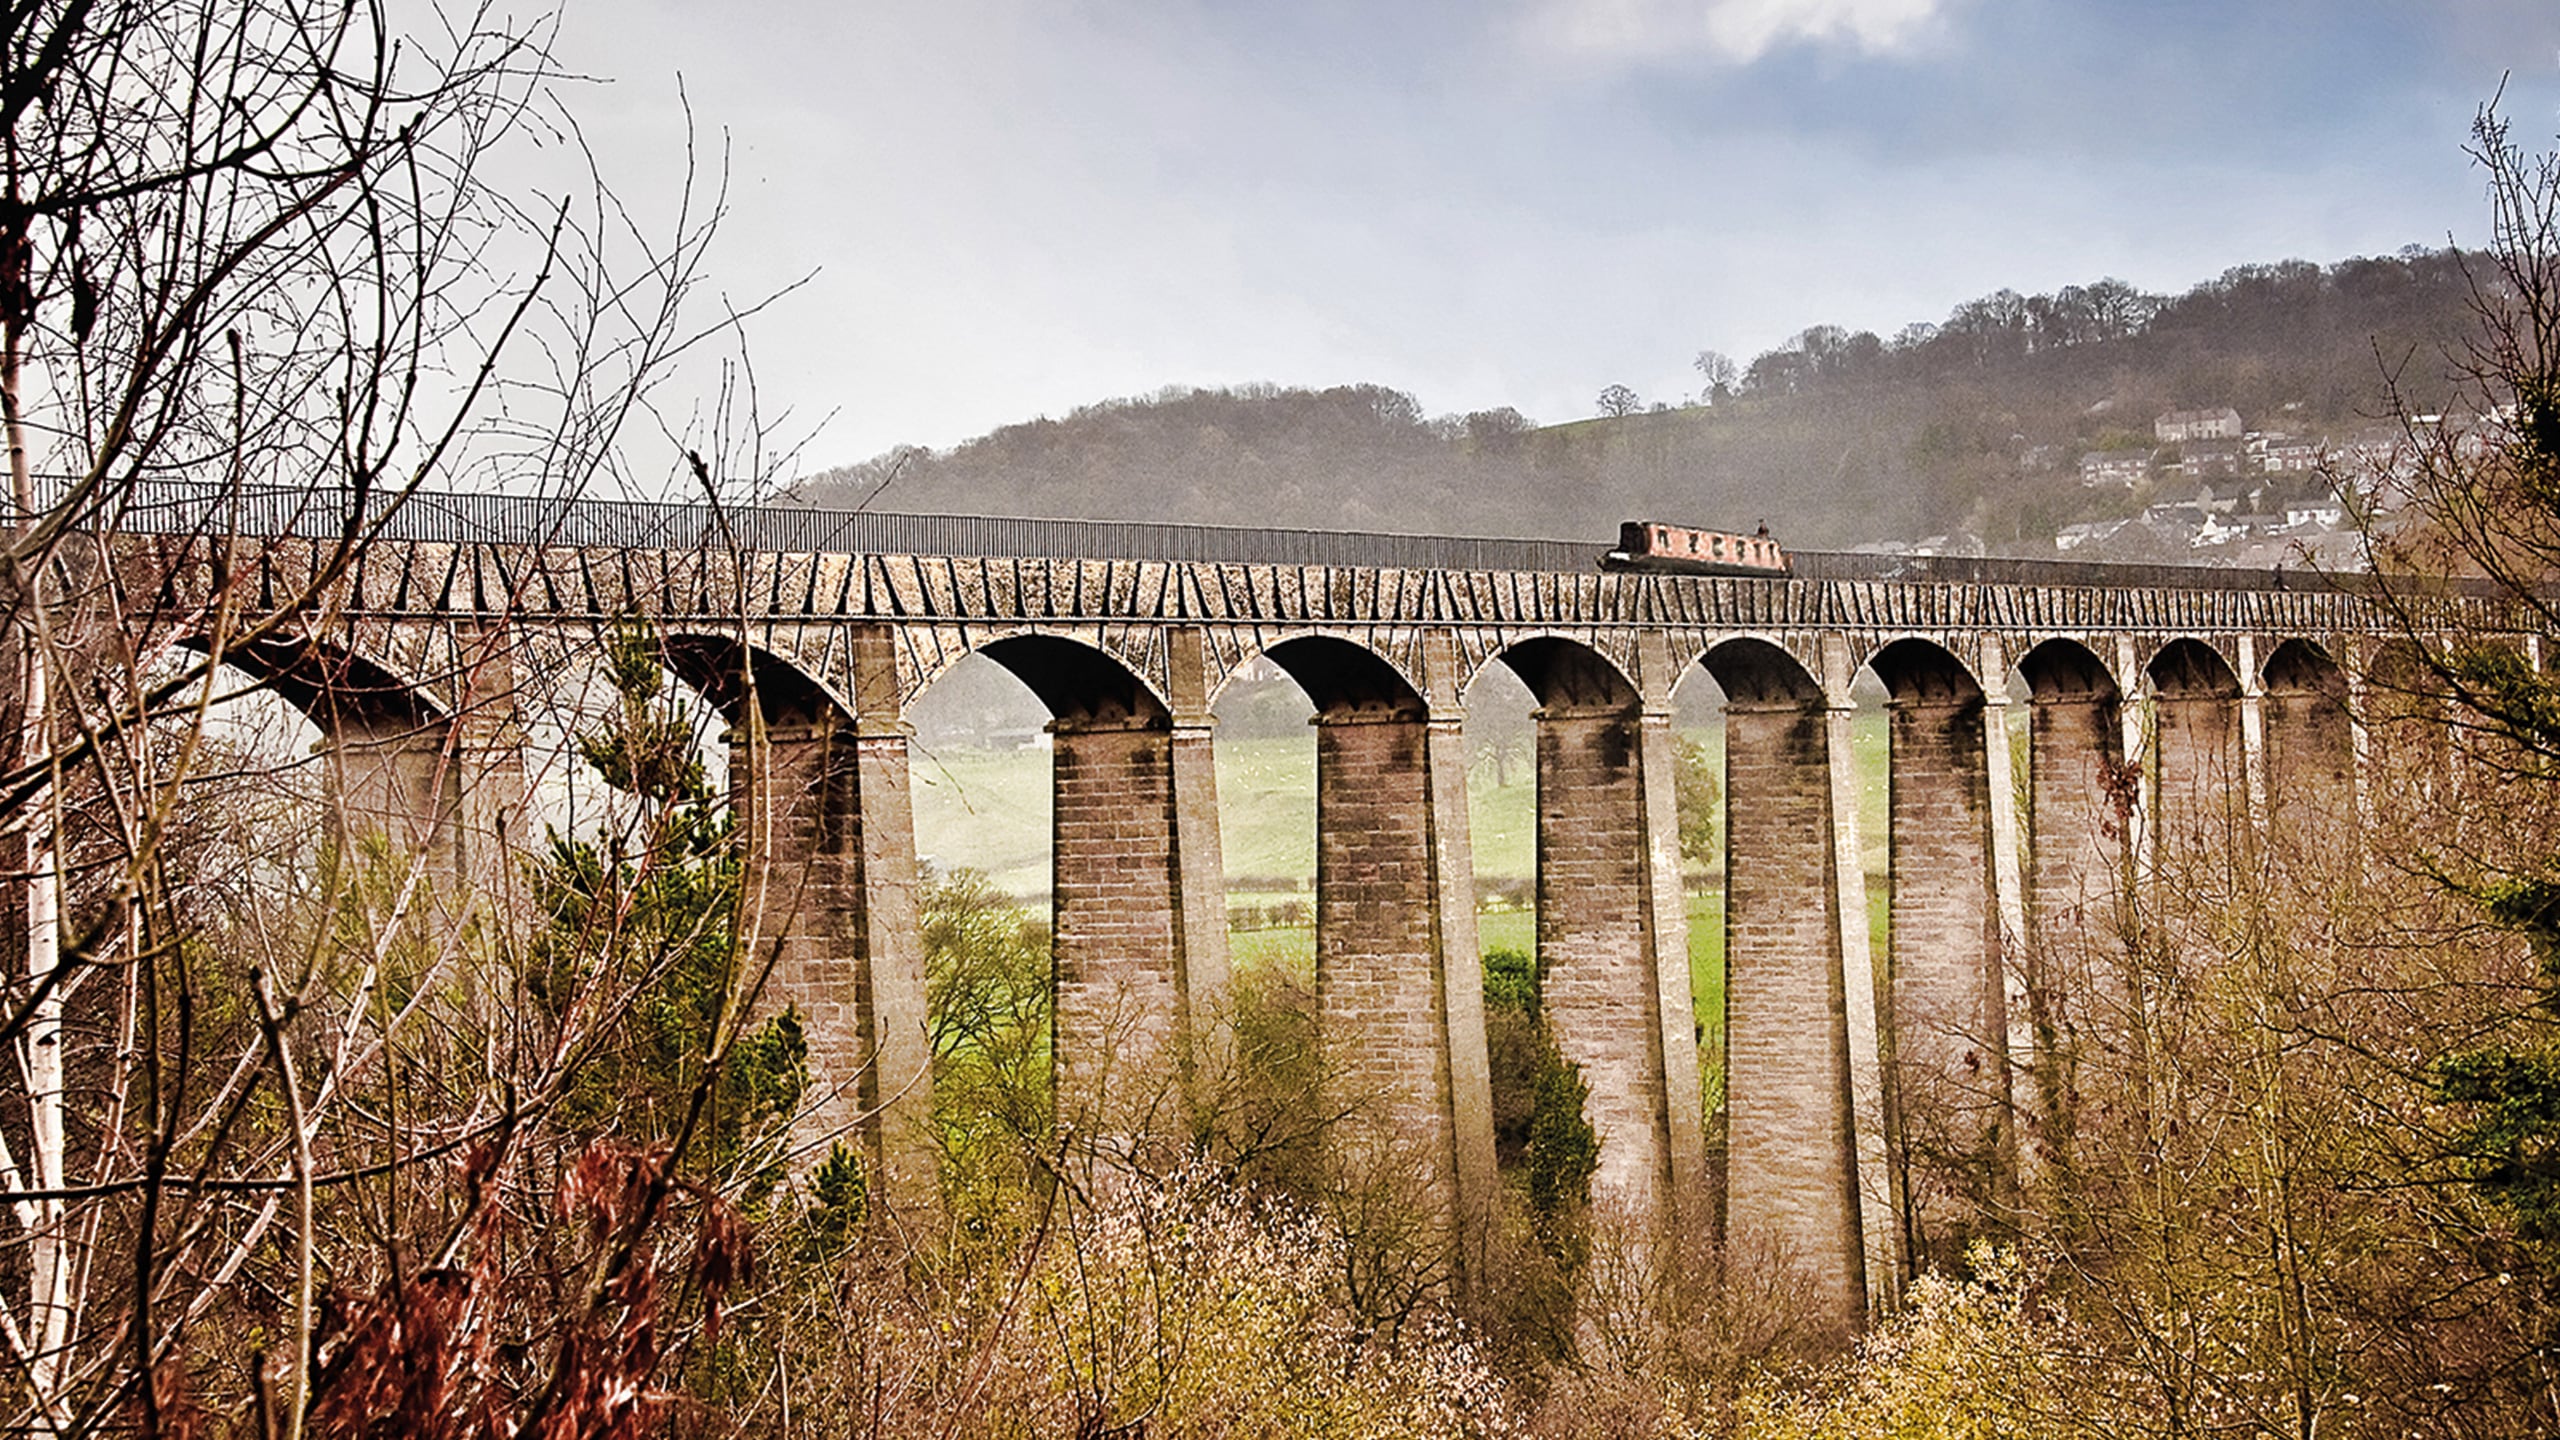 Canal aqueducts - The Inland Waterways Association